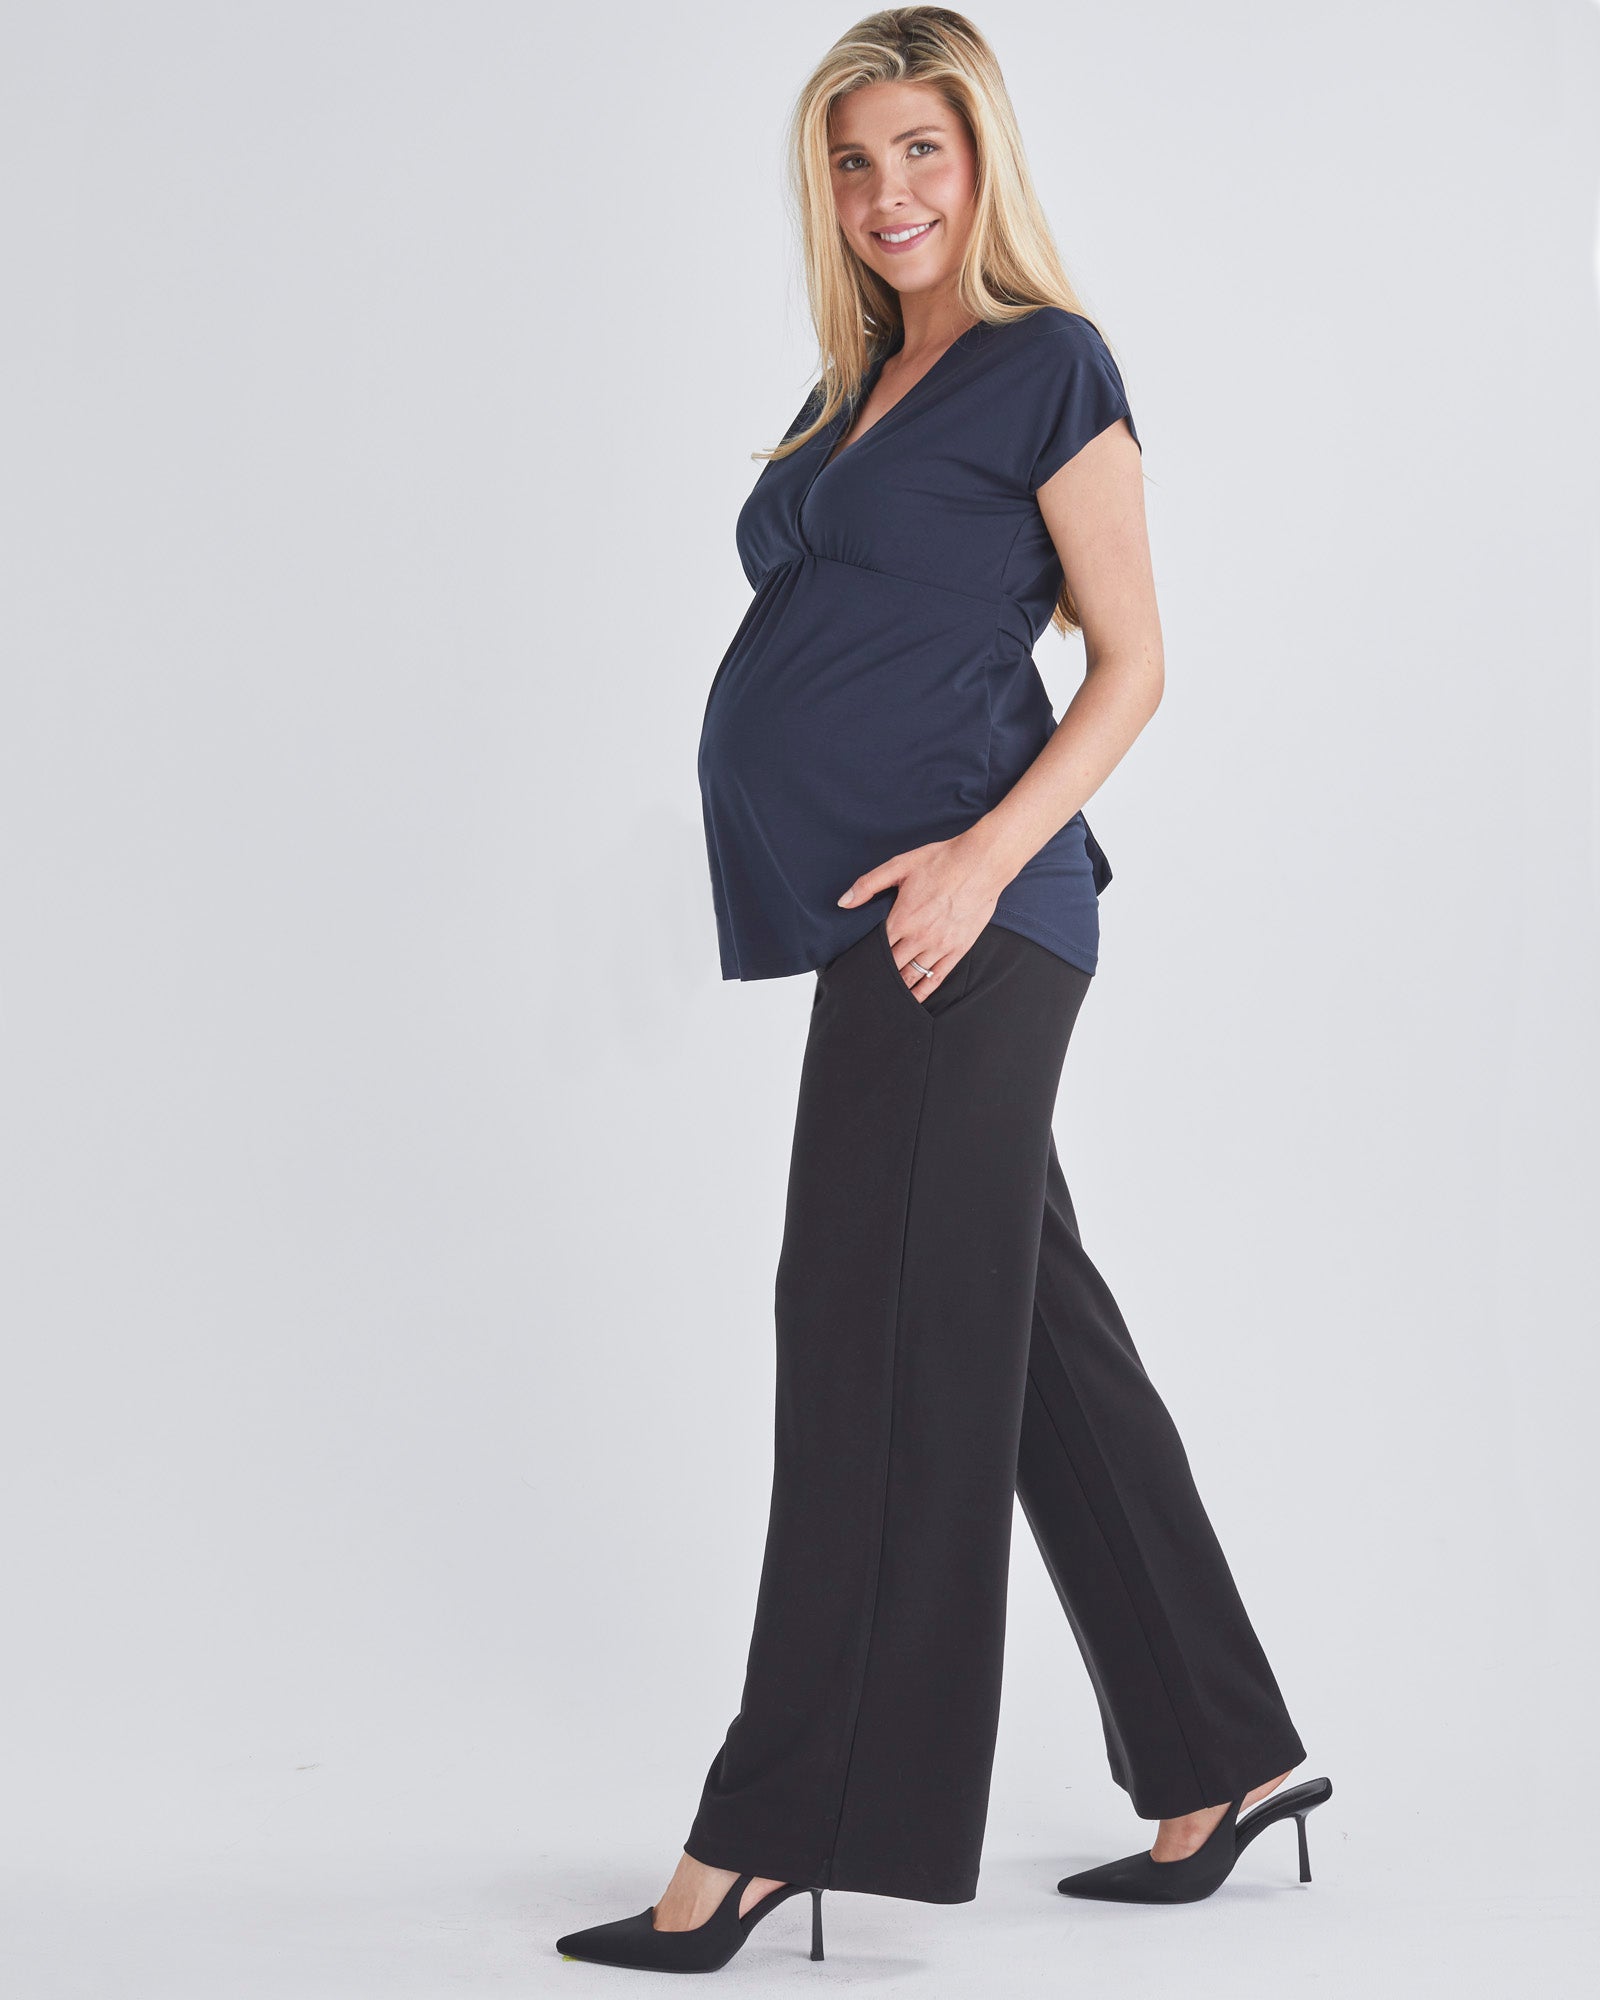 Maternity Work Clothes & Work Pants